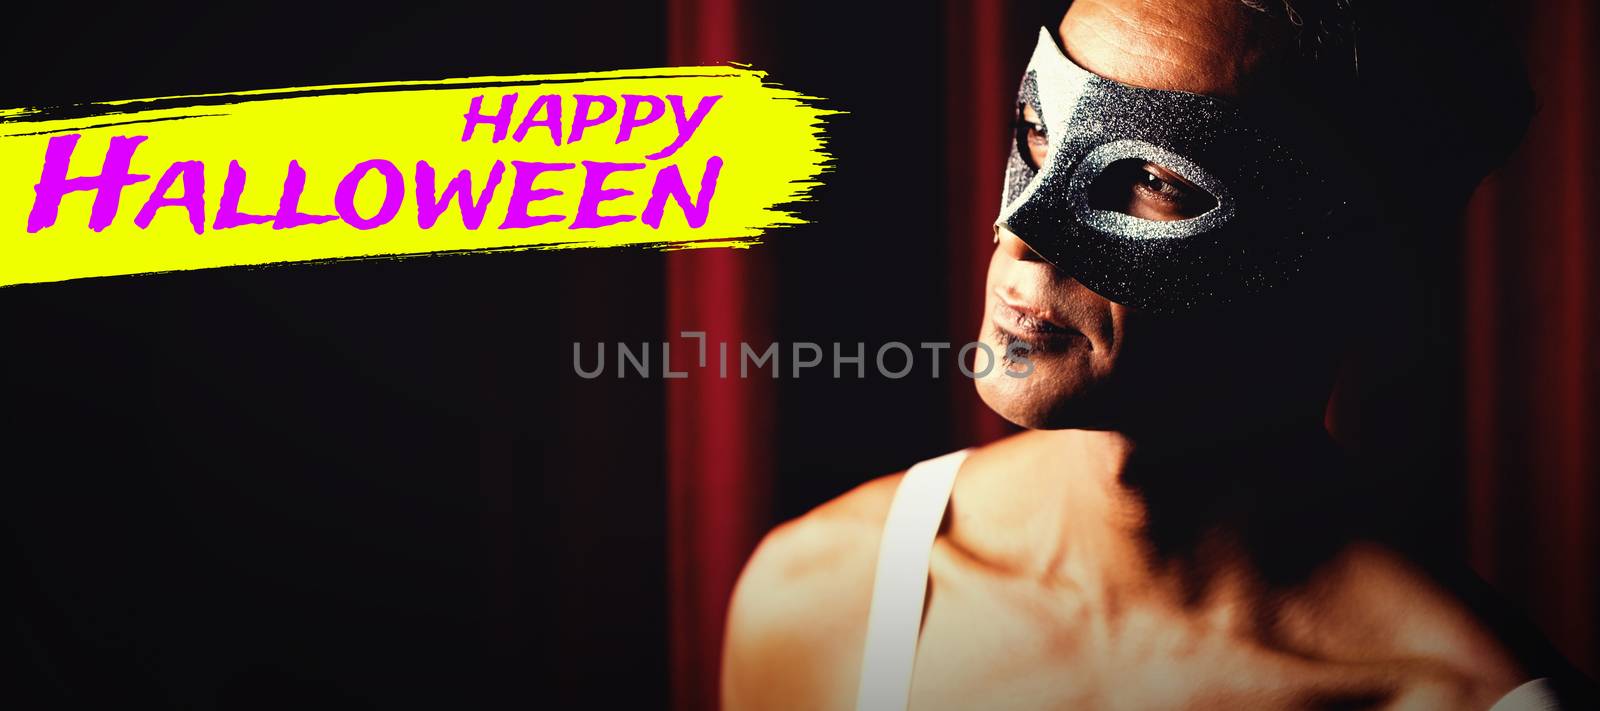 Digital image of happy Halloween text against man in masquerade mask